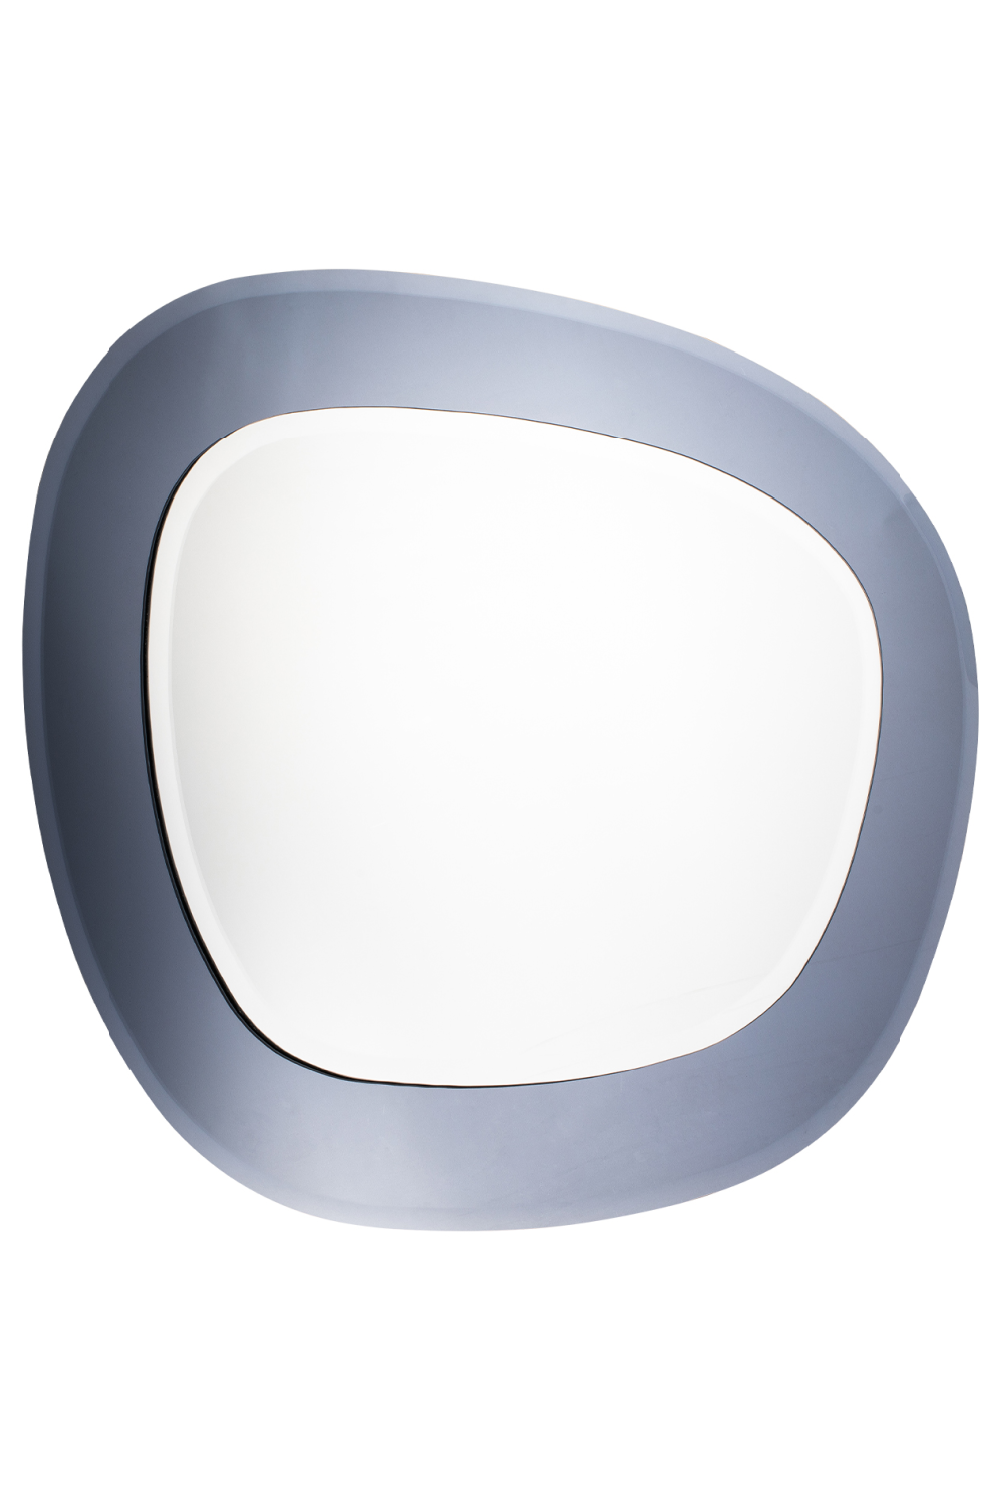 Gray Oval Accent Mirror | Liang & Eimil Maxwell | Oroa.com